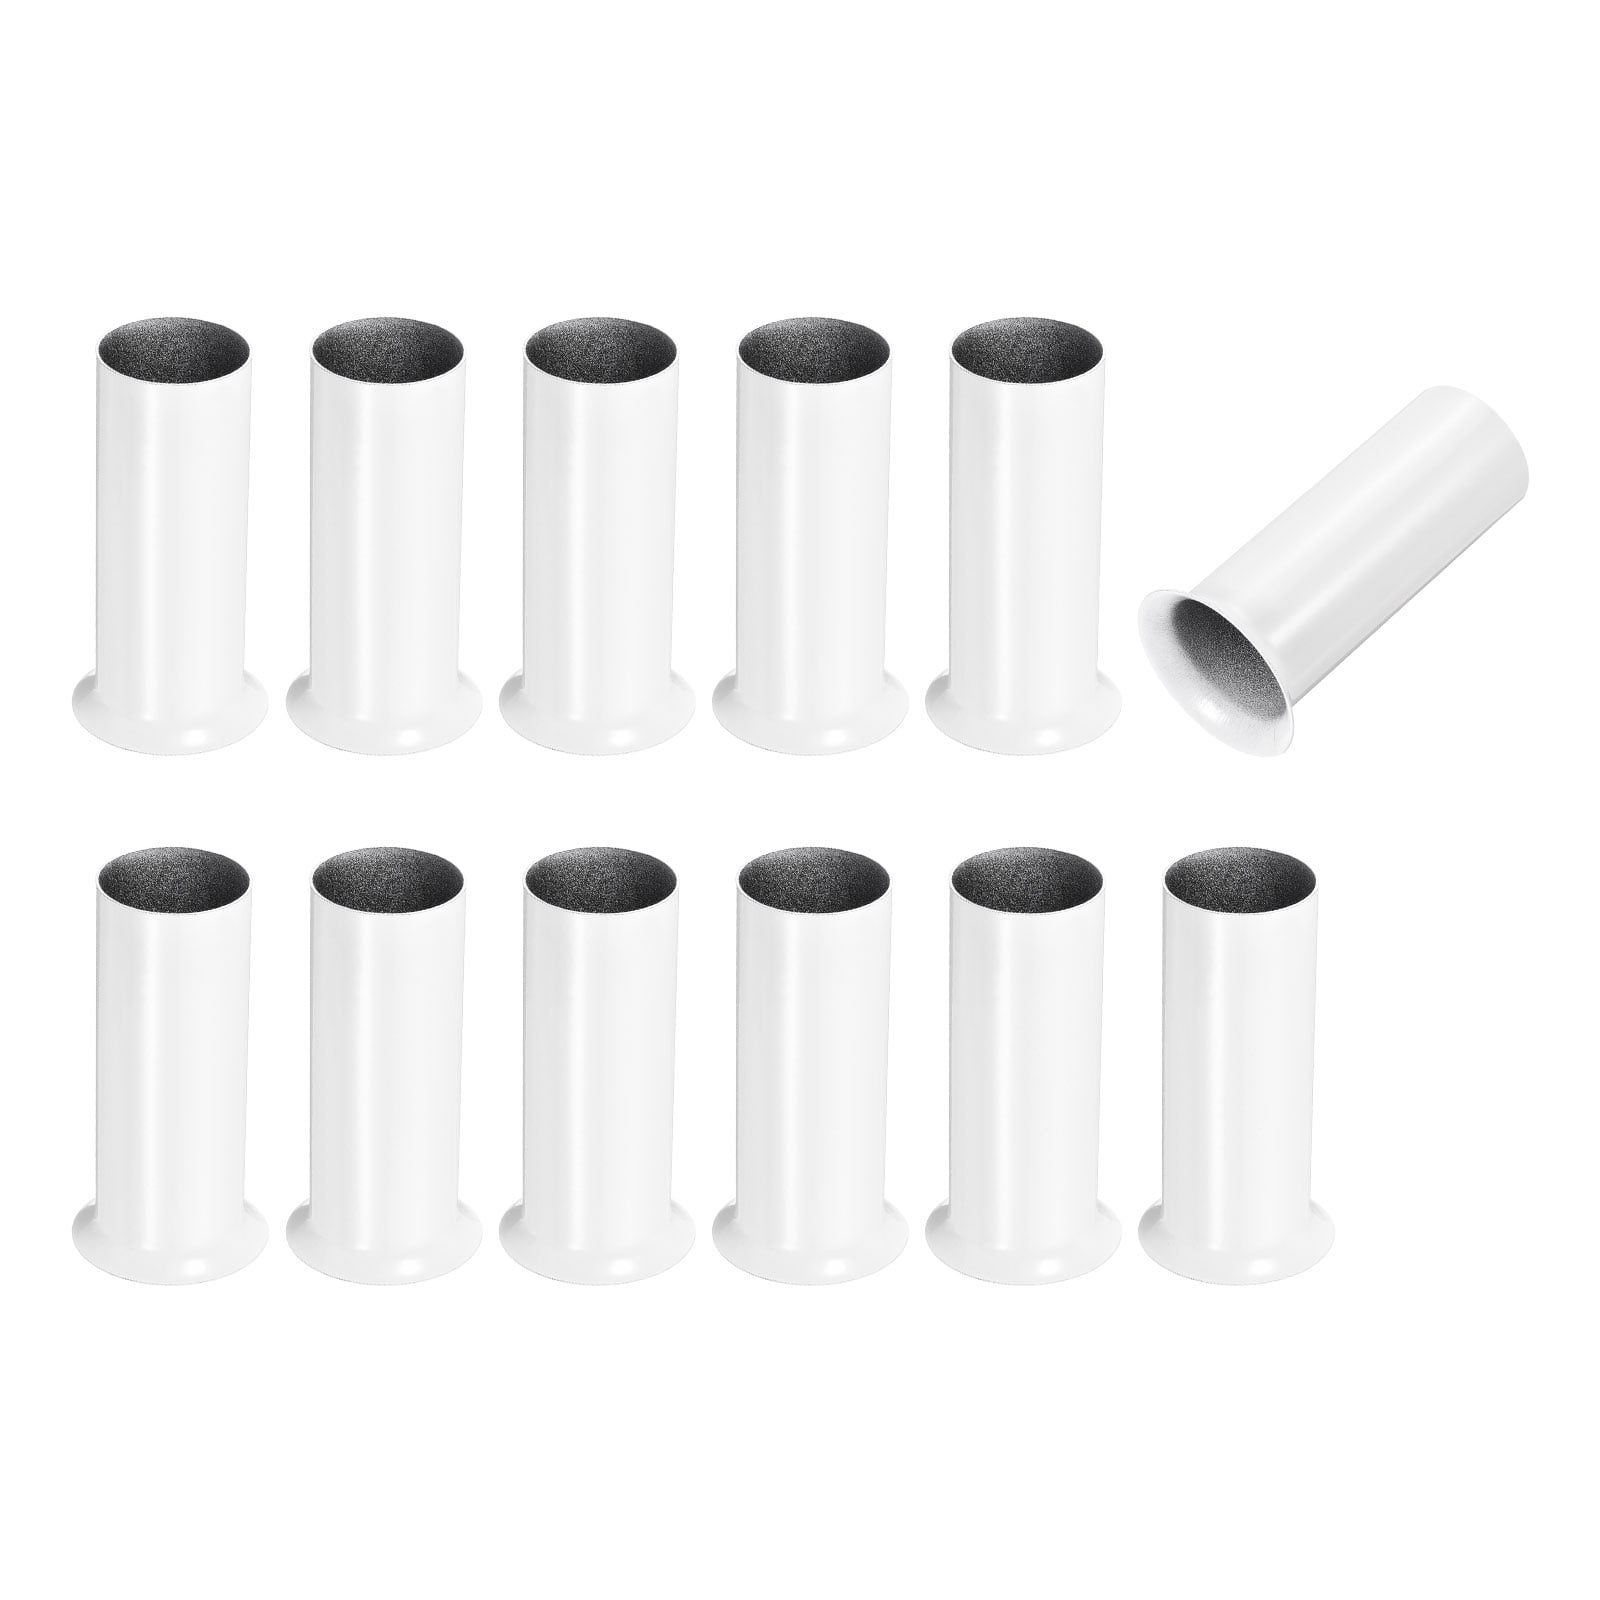 uxcell 4pcs 25mmx80mm Chrome Tone Metal Candle Cover Sleeves Chandelier Socket Covers